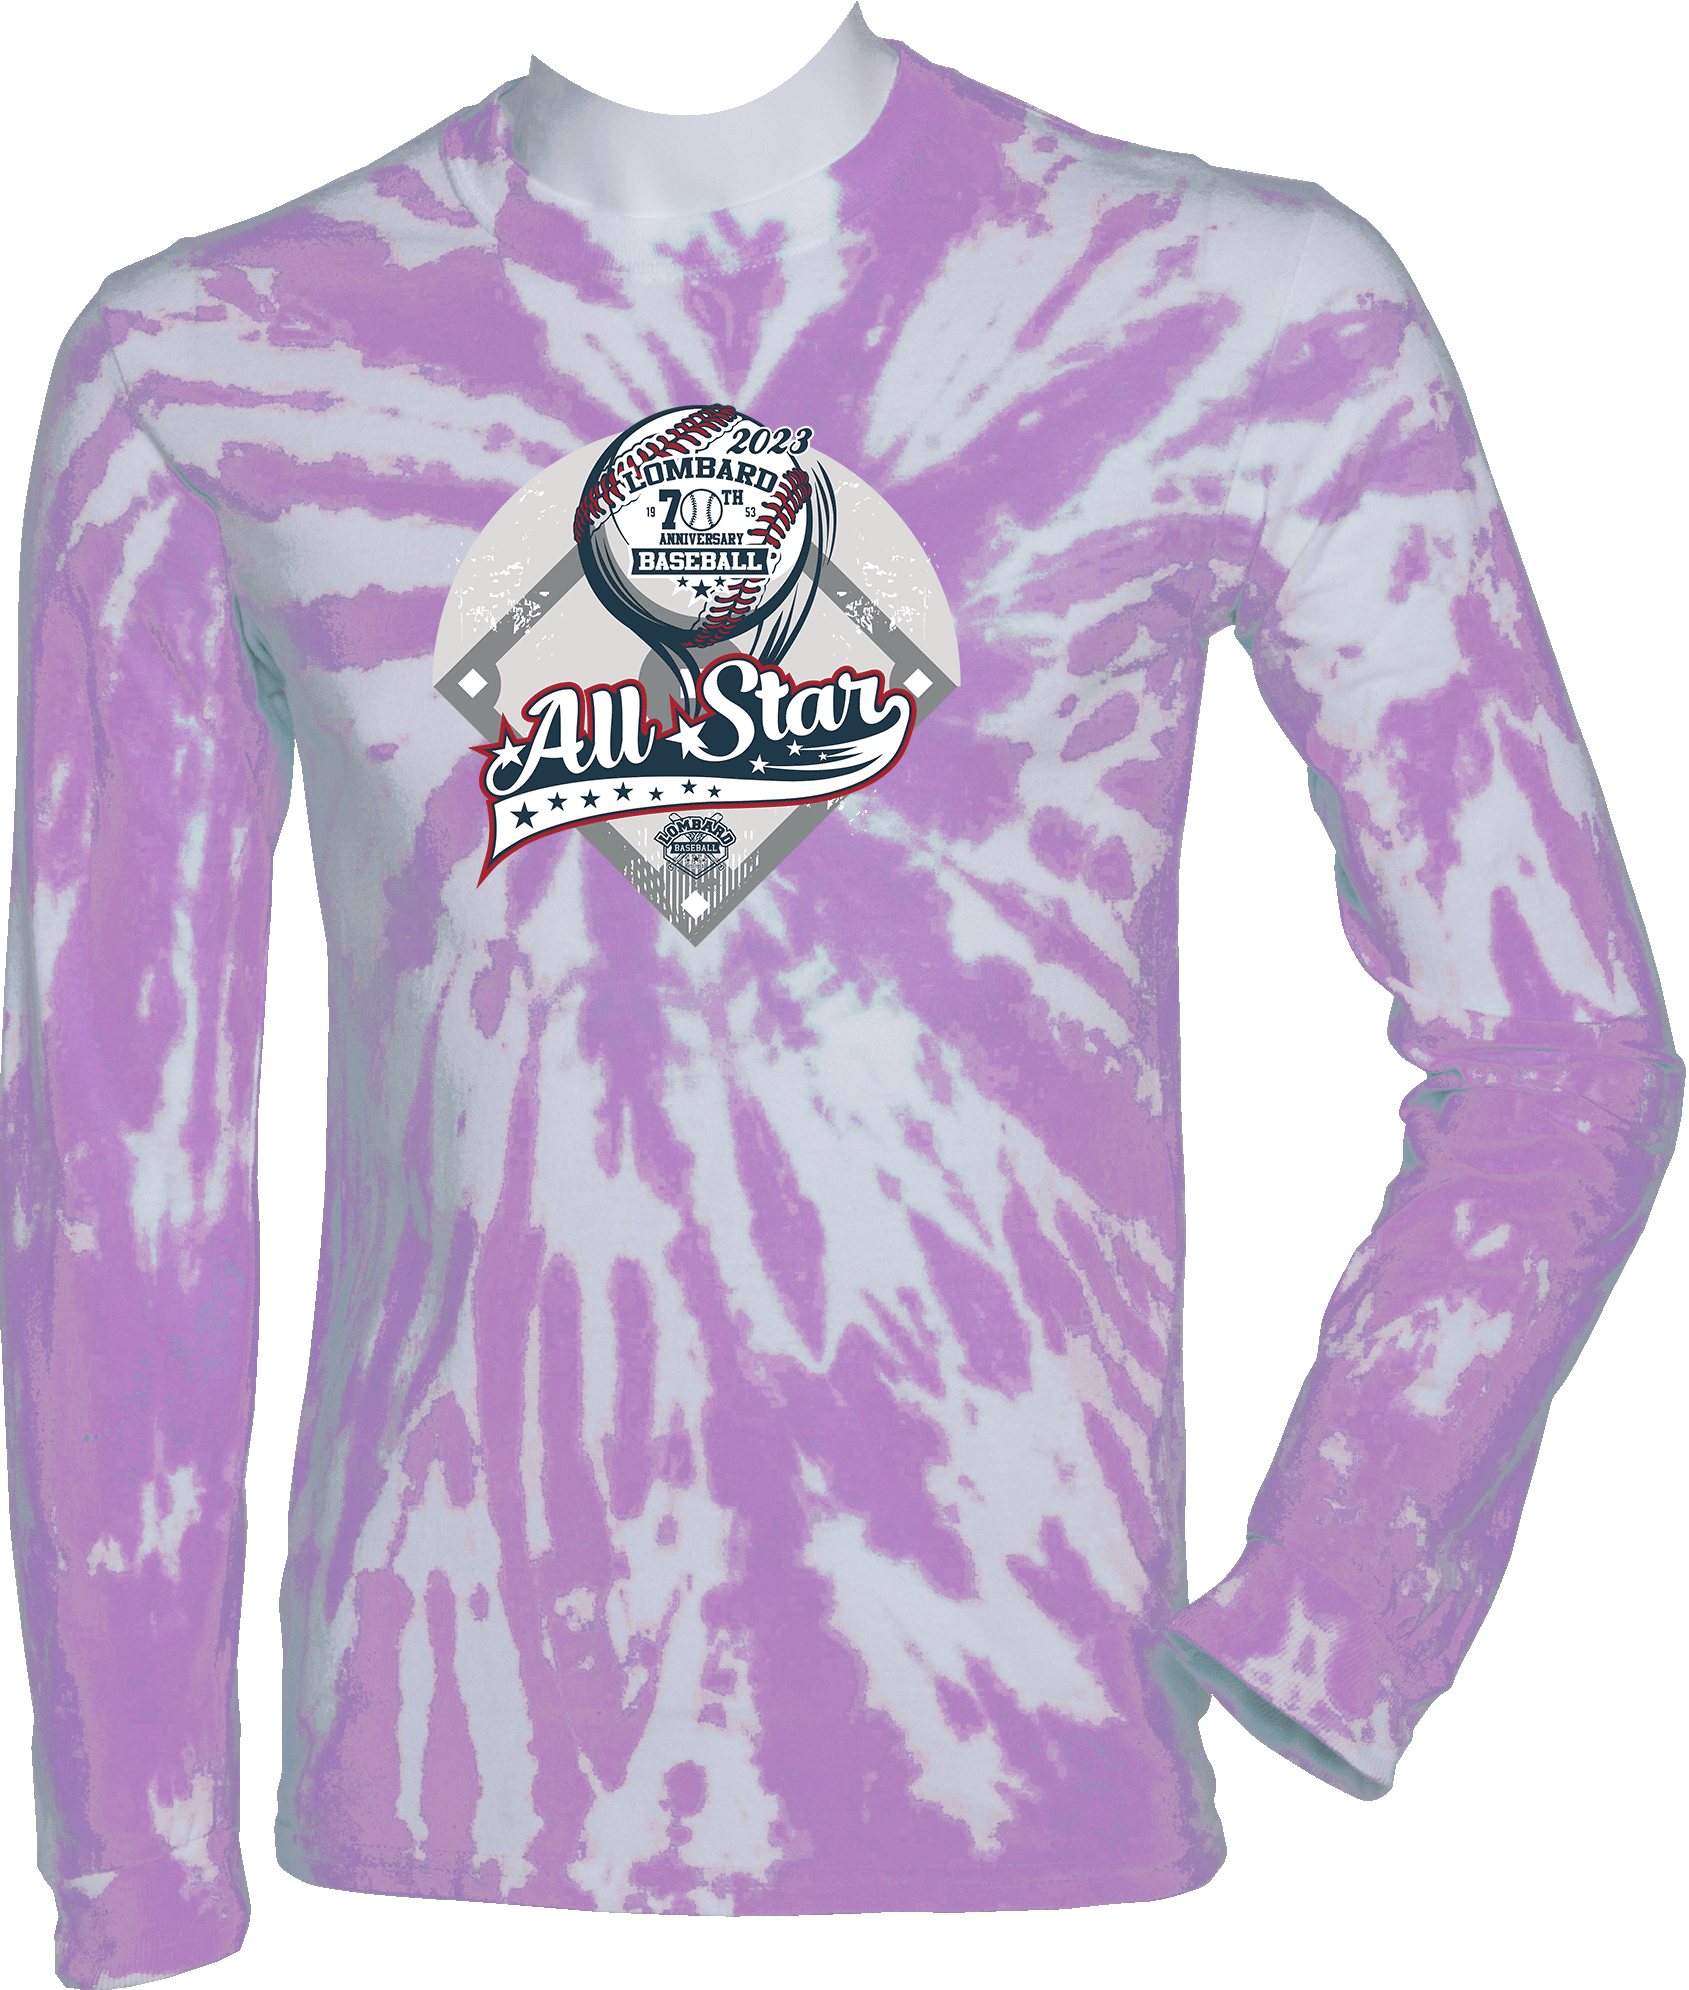 TIE-DYE LONG SLEEVES - 2023 Lombard Baseball League's 70th Anniversary All Star Event